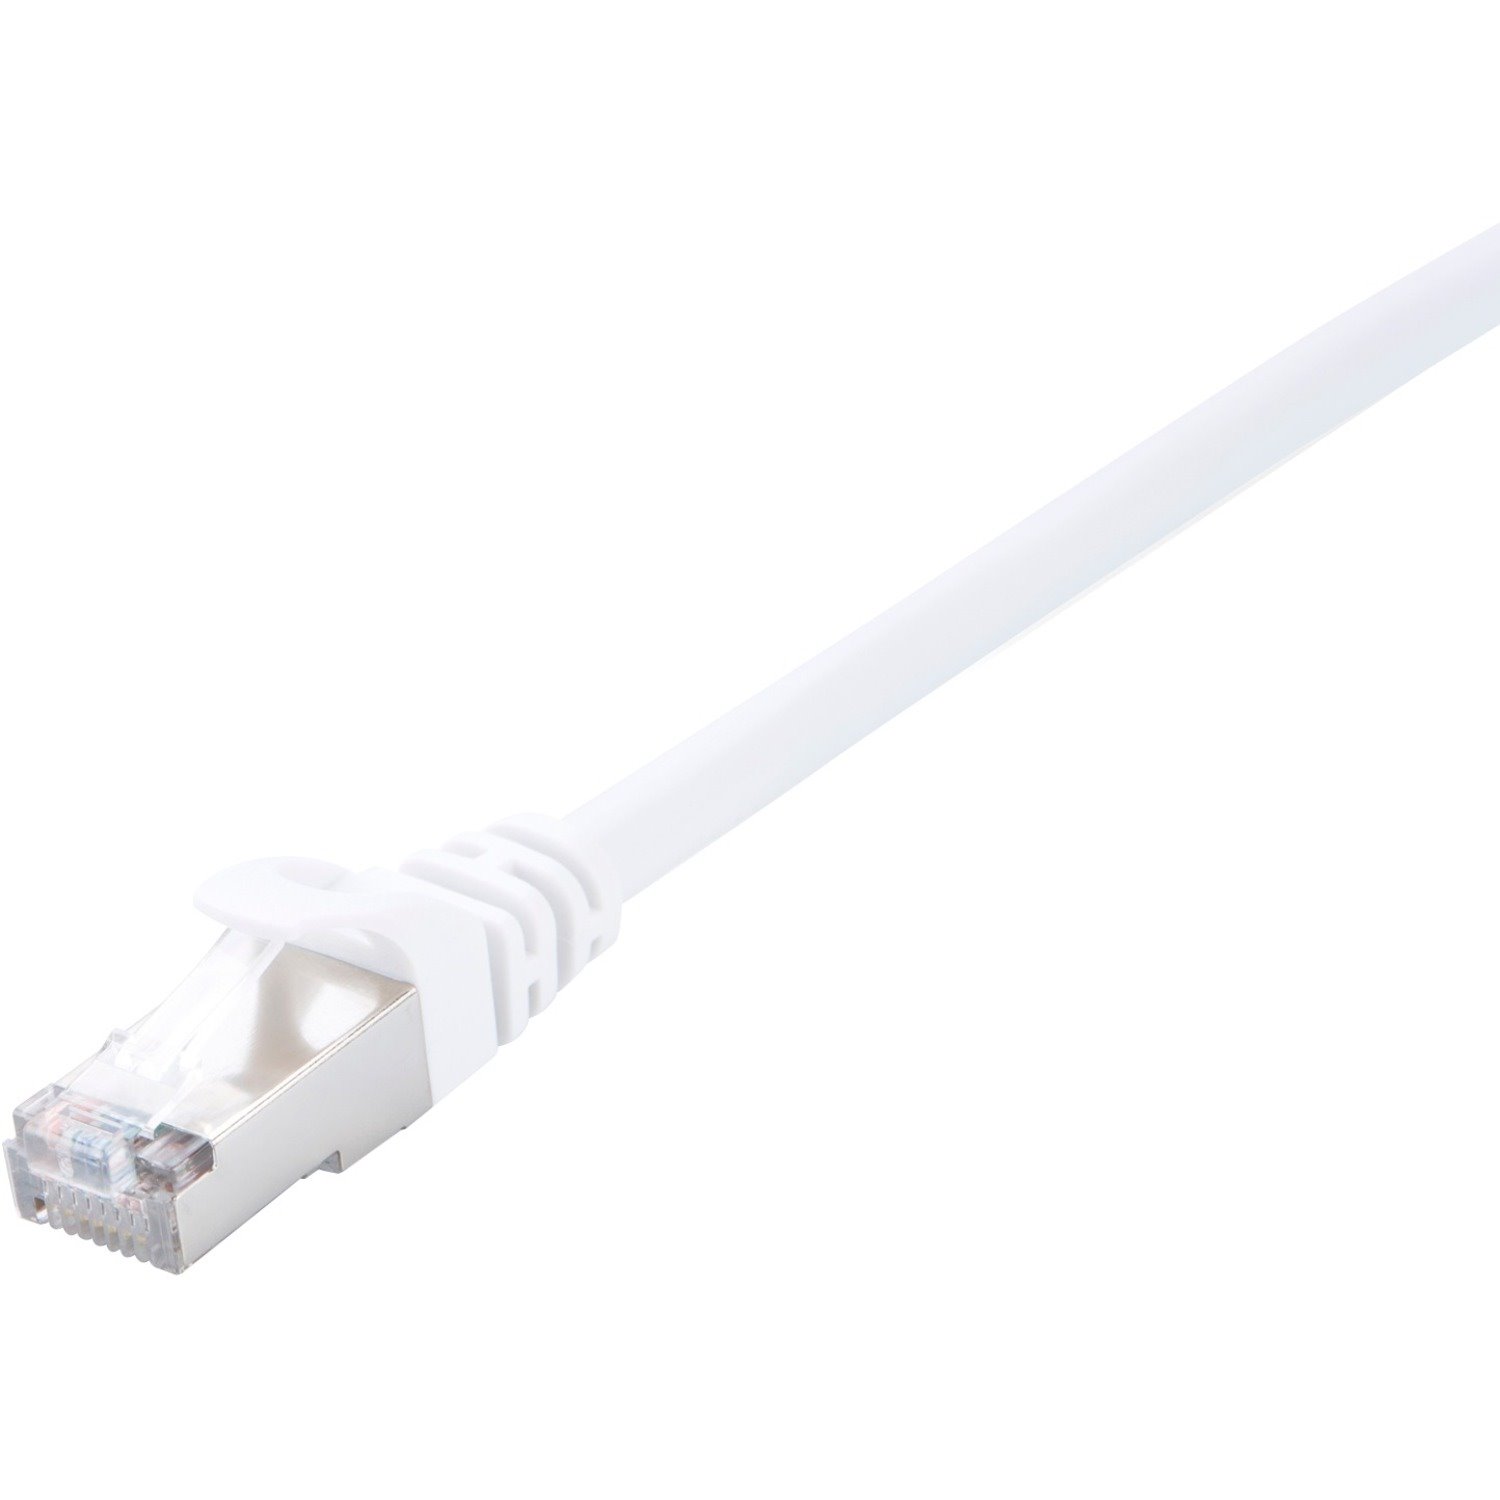 V7 White Cat6 Shielded (STP) Cable RJ45 Male to RJ45 Male 3m 10ft